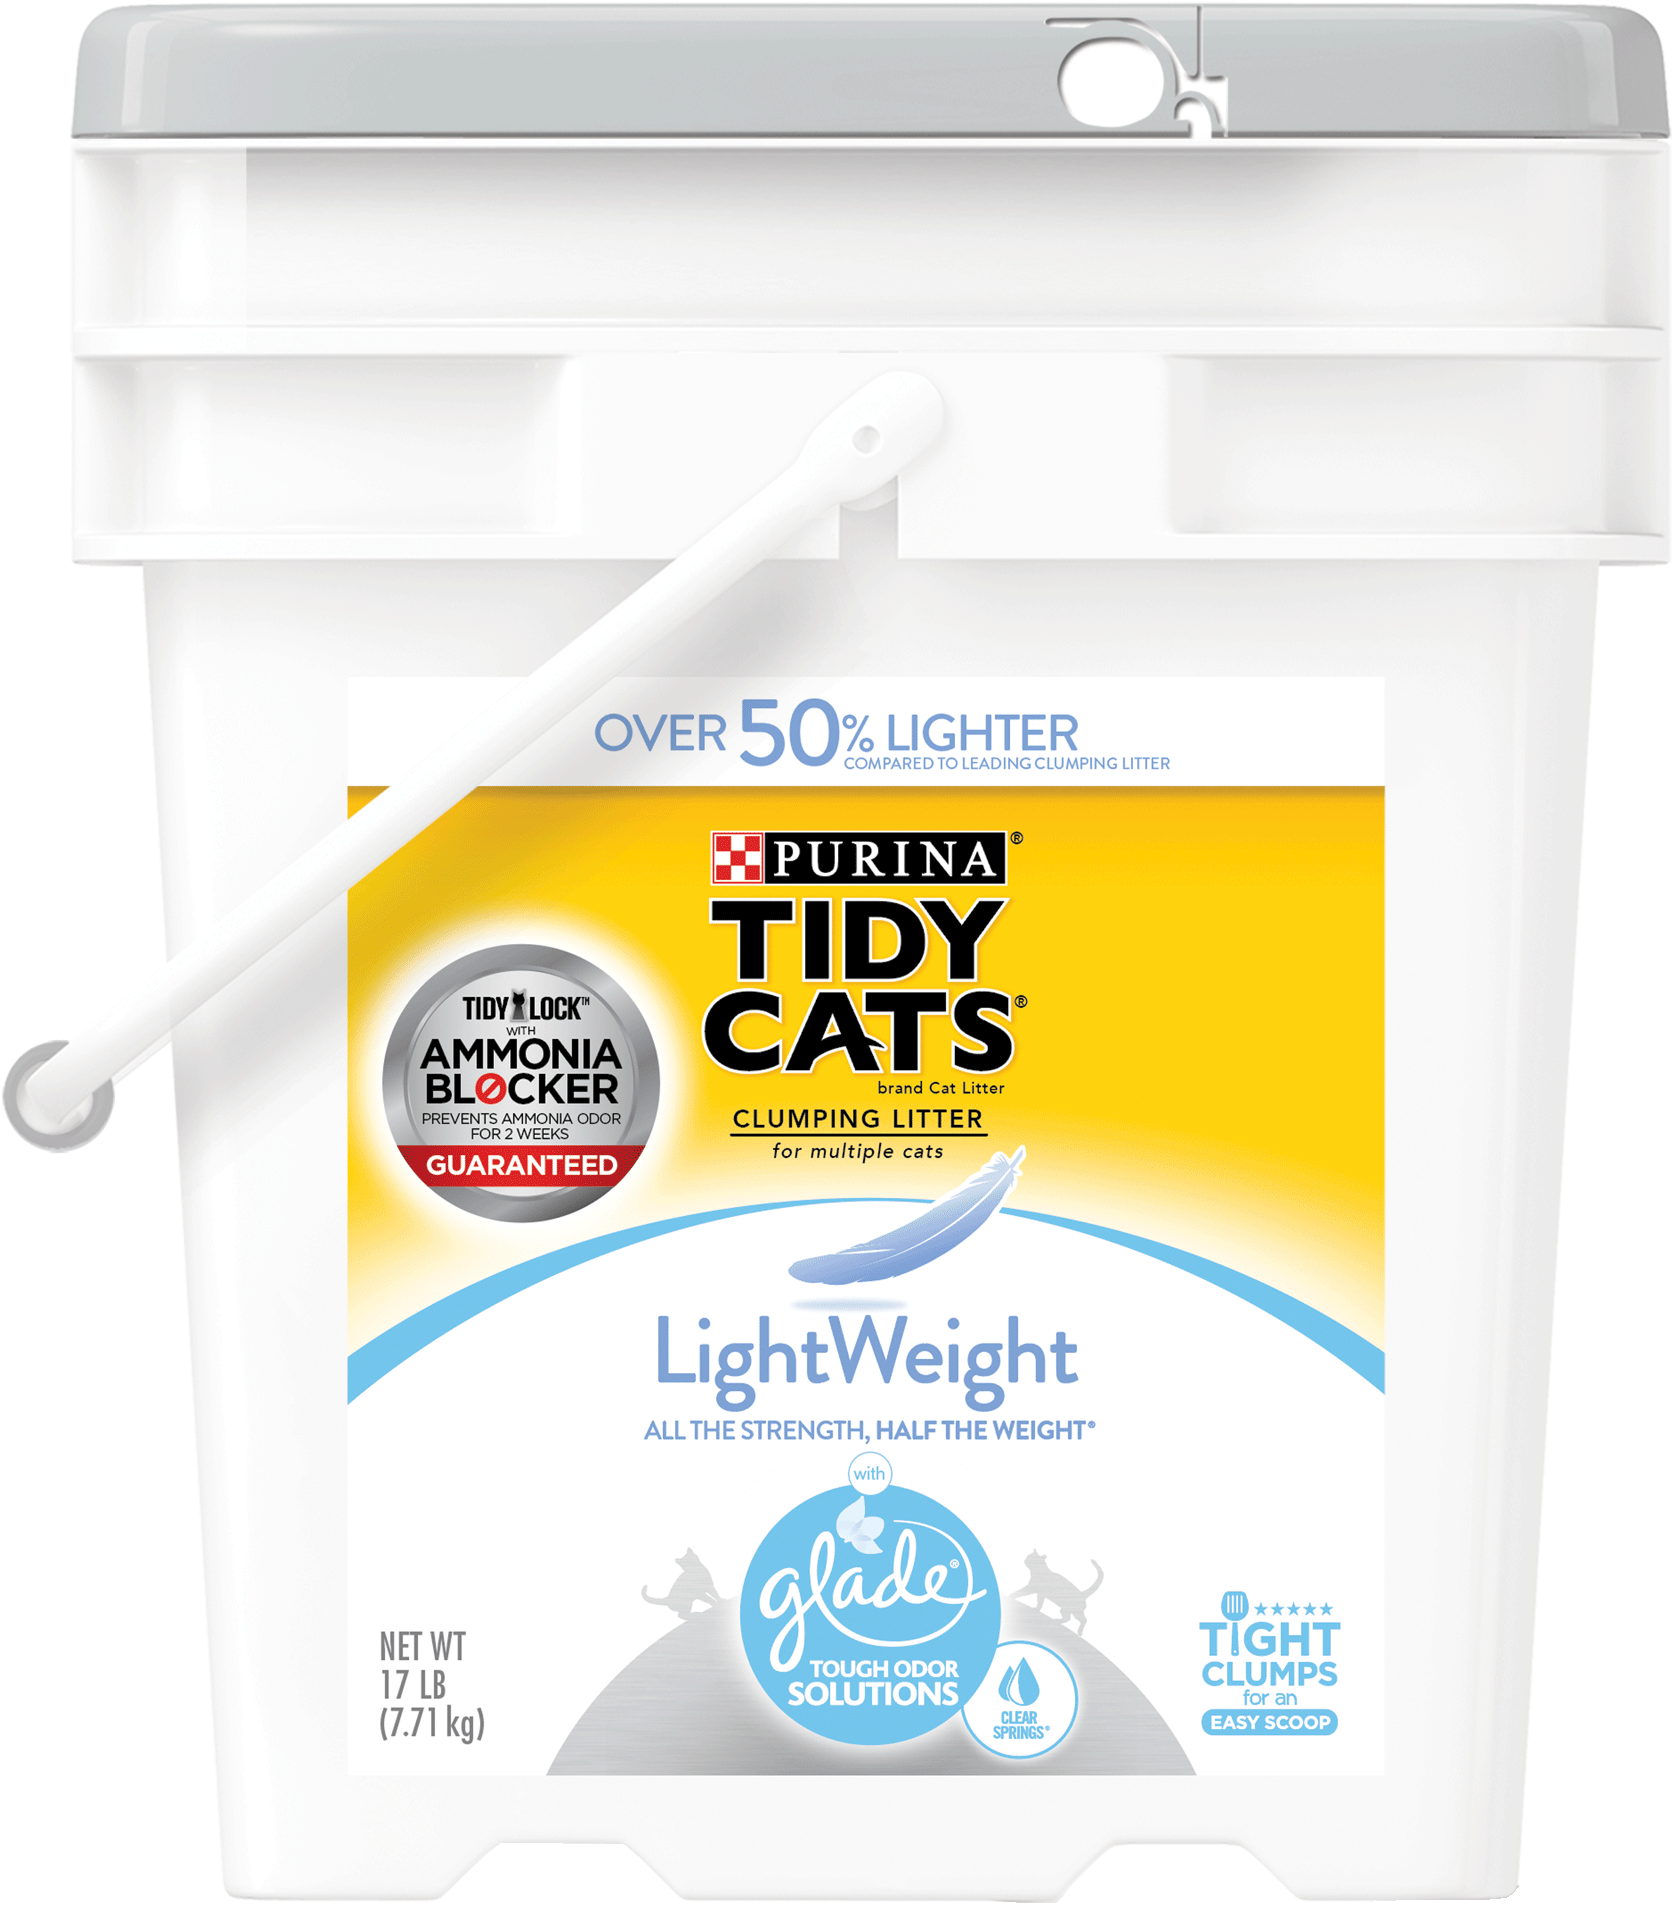 Purina Tidy Cats Lightweight Glade Tough Odor Solutions - Purina Tidy Cats Lightweight Clumping Cat Litter (2000x2000), Png Download